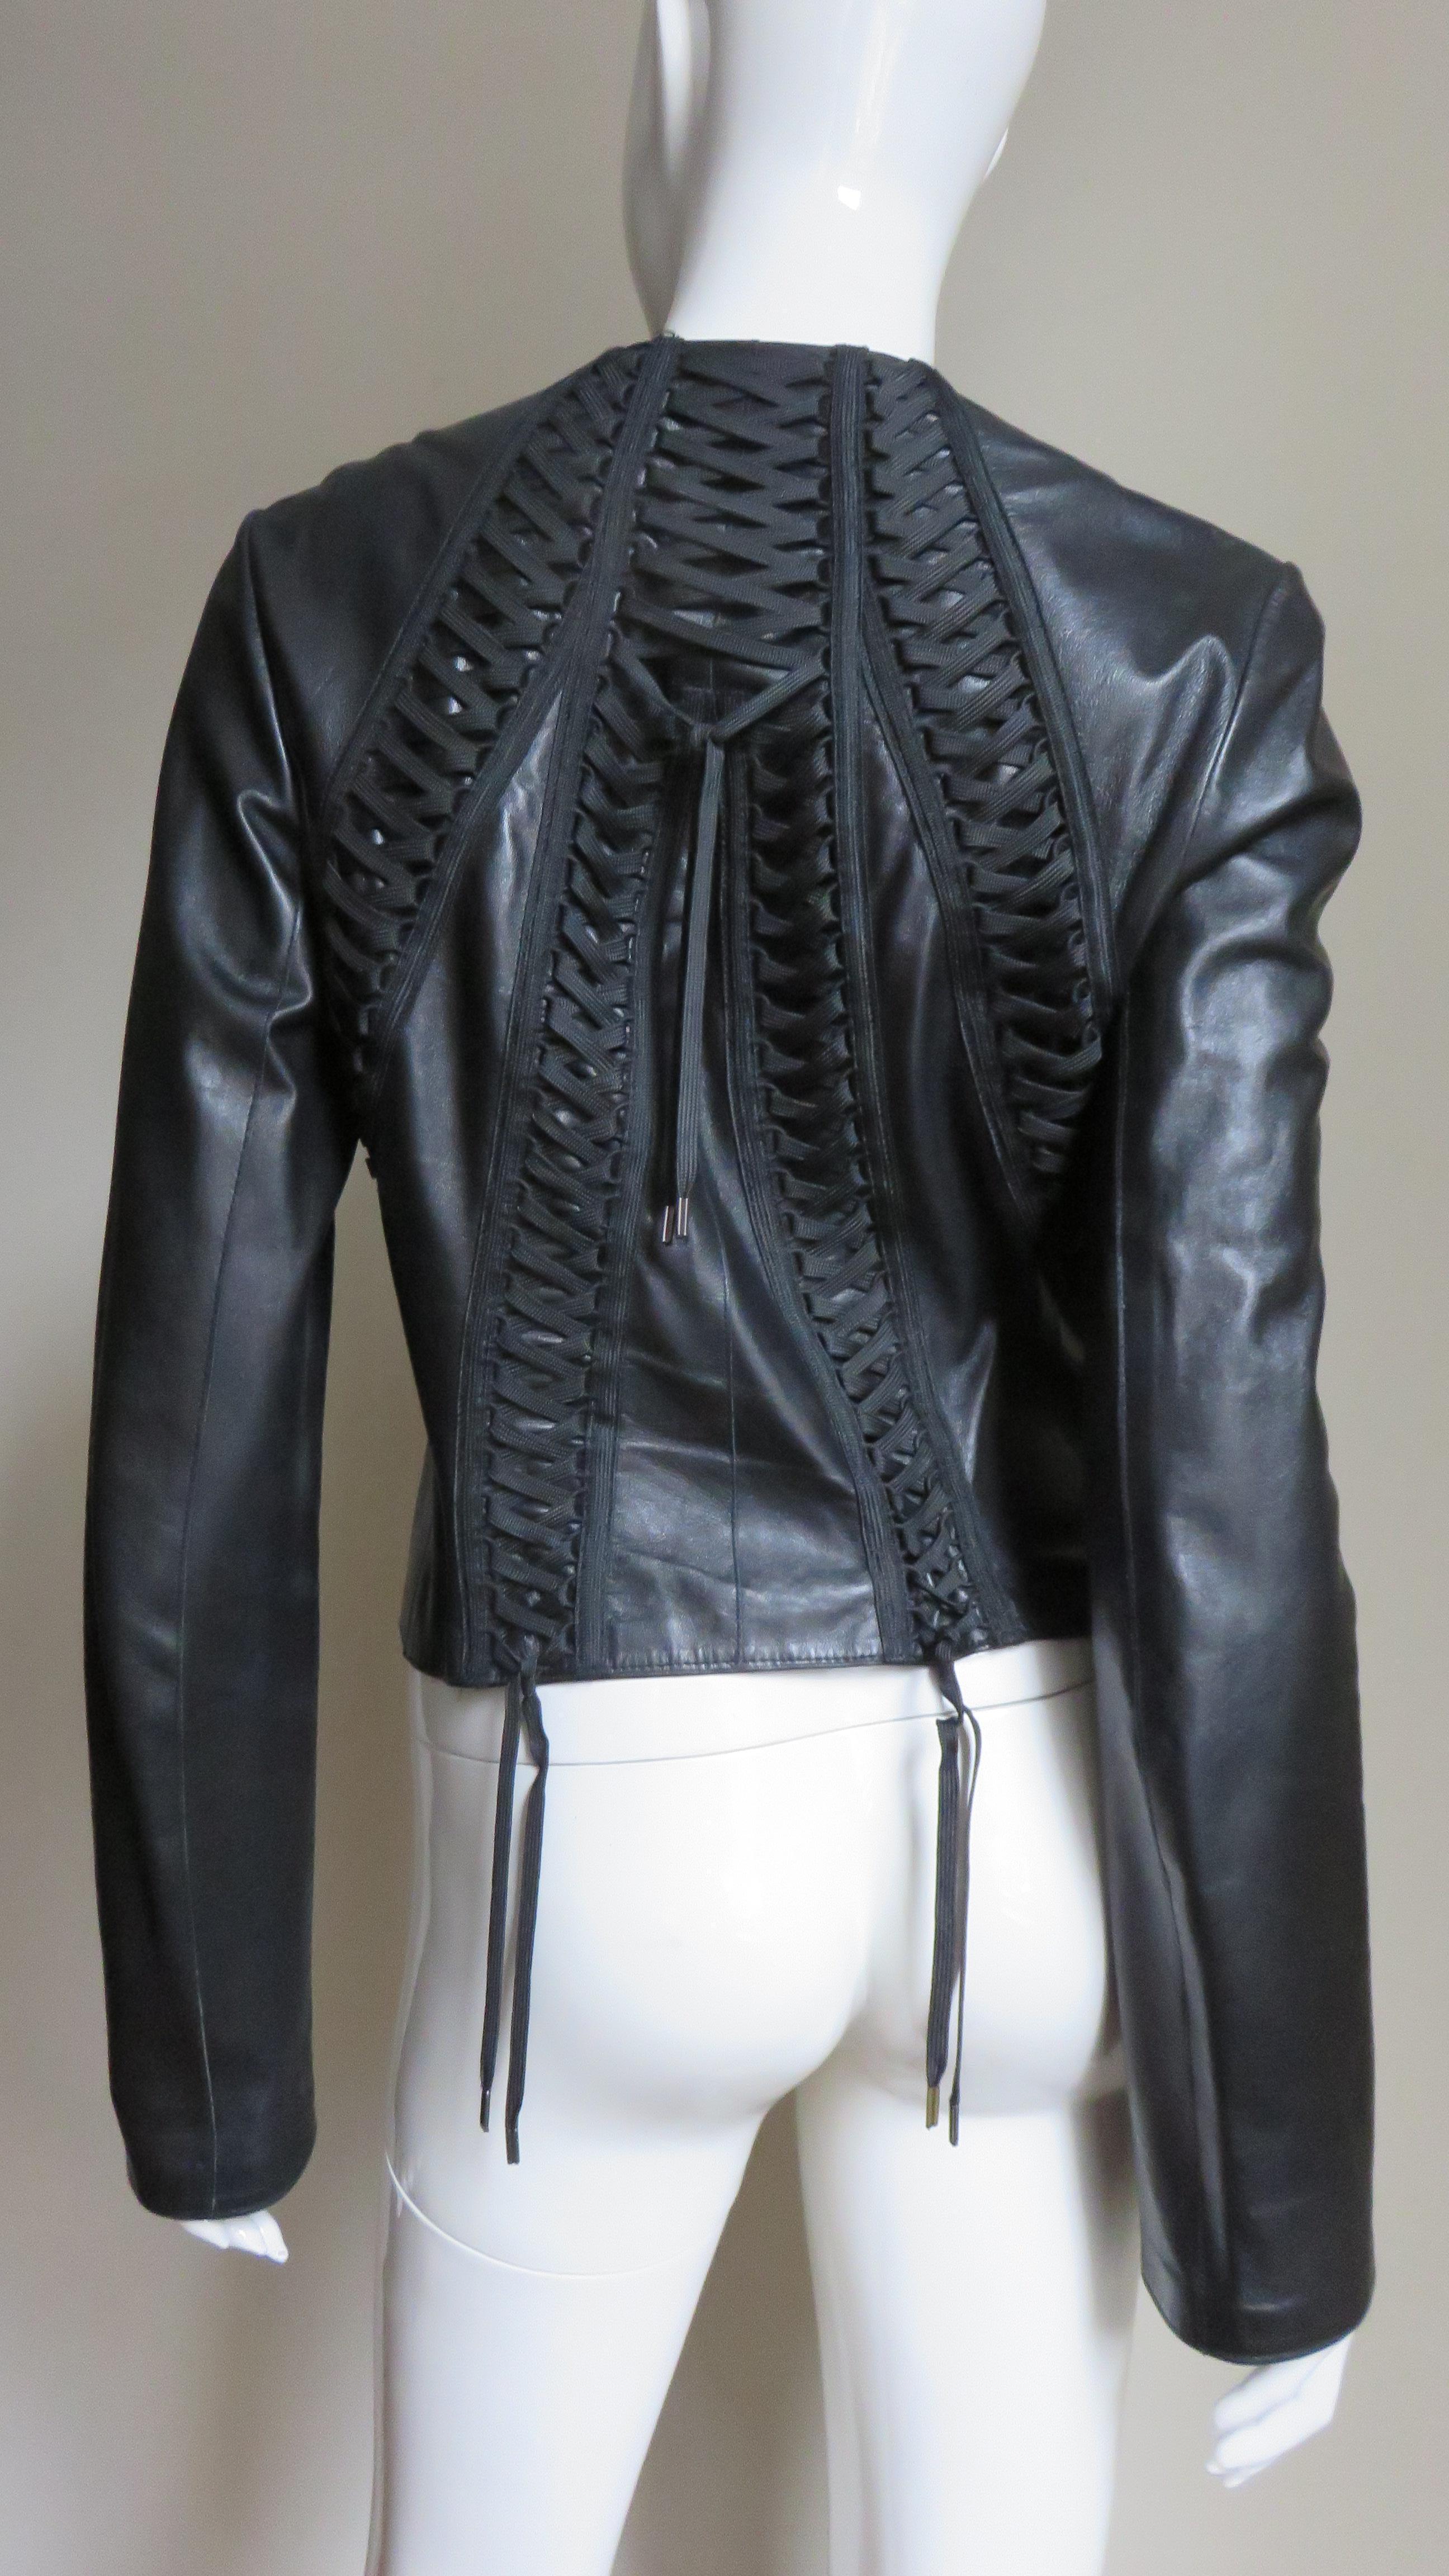 Christian Dior by John Galliano Lace-up Leather Jacket S/S 2002 For Sale 1